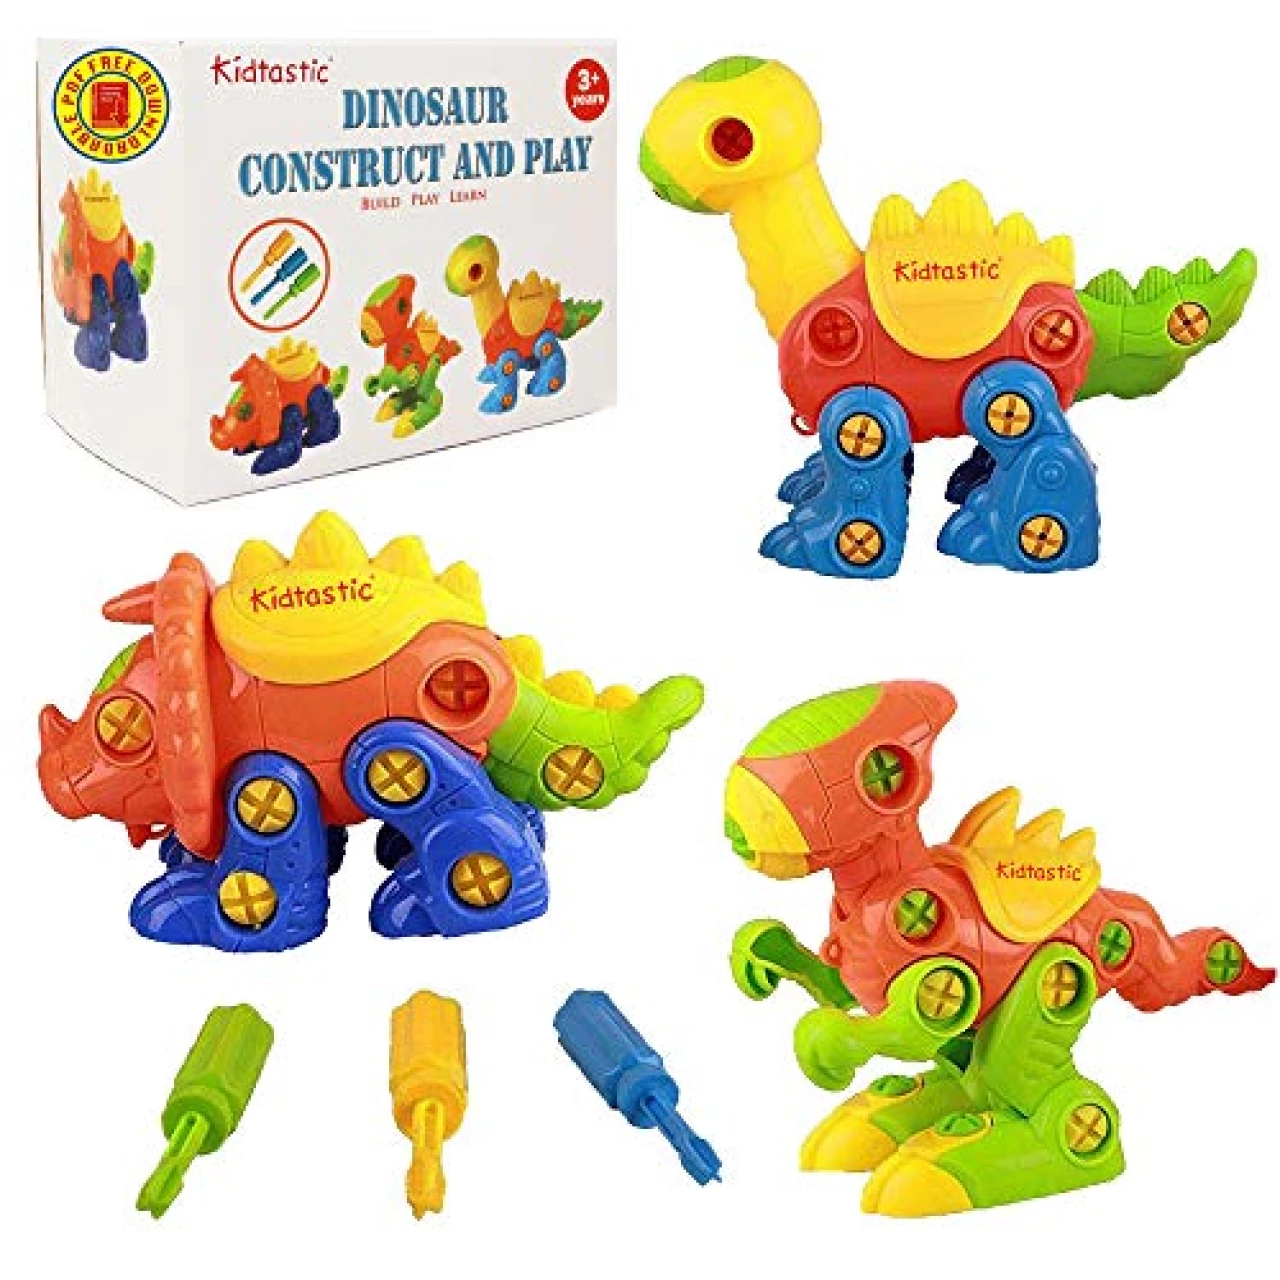 Kidtastic Dinosaur Toys, 106 pcs Take Apart Stem Learning Toys with Screwdriver, Ages 3-6 Year Kids Birthday Gift, Fun Construction for Boys and Girls - Build a Dinosaur, 3 yr Old Toddler Toys